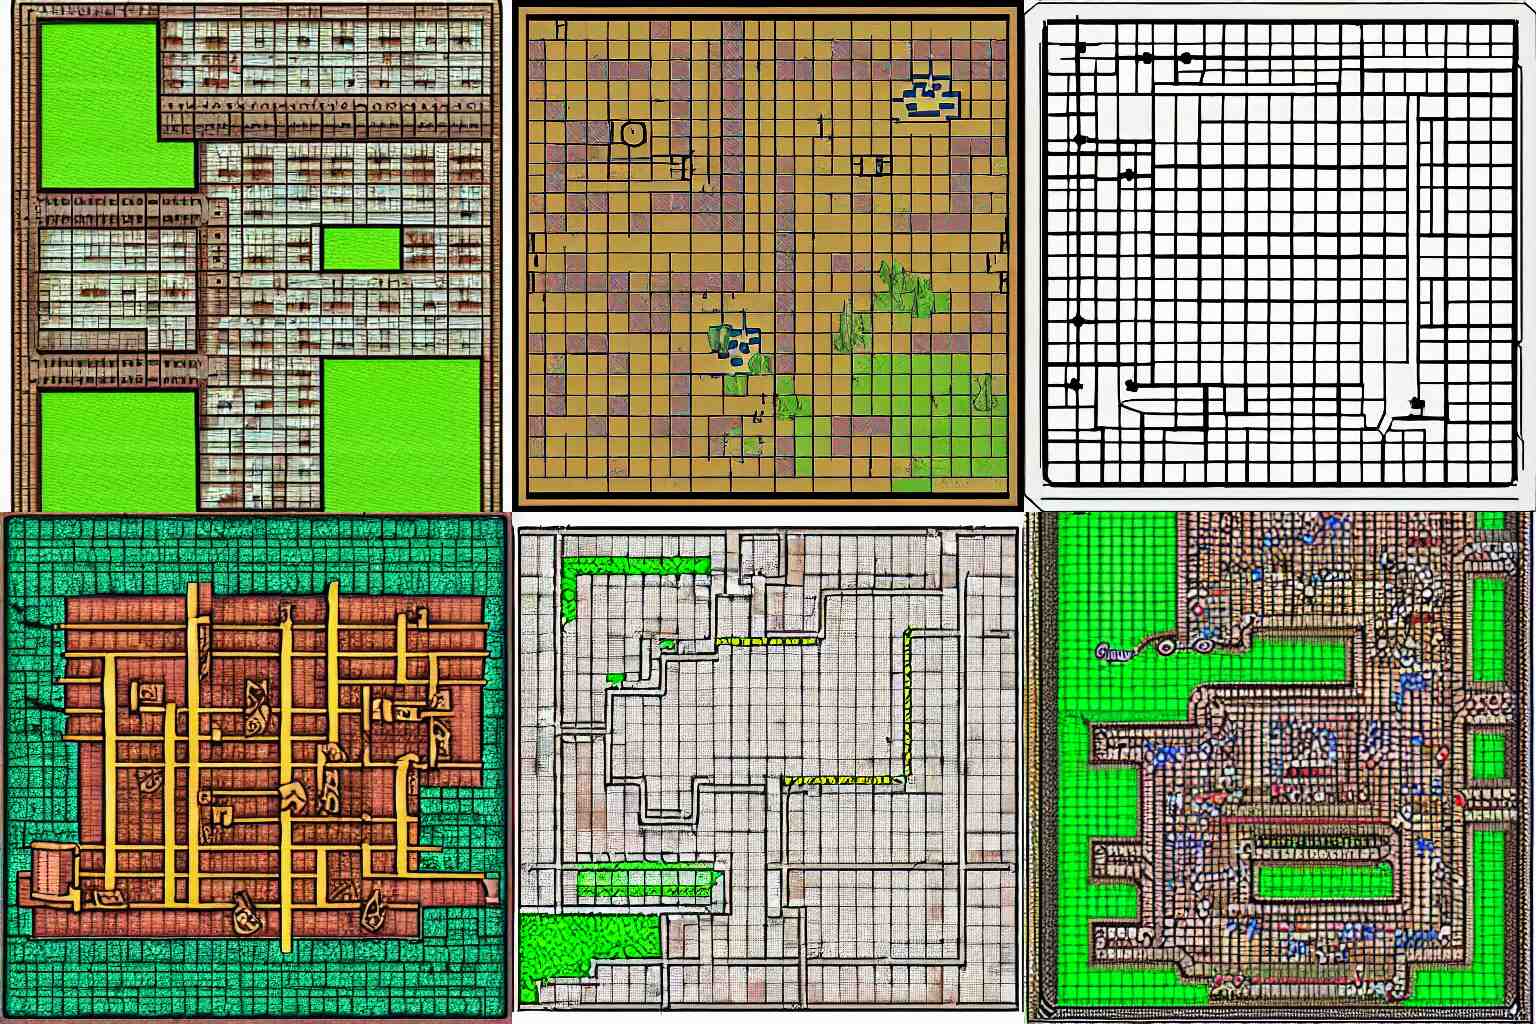 dungeon map in the style of dungeons and dragons, 1 inch grid